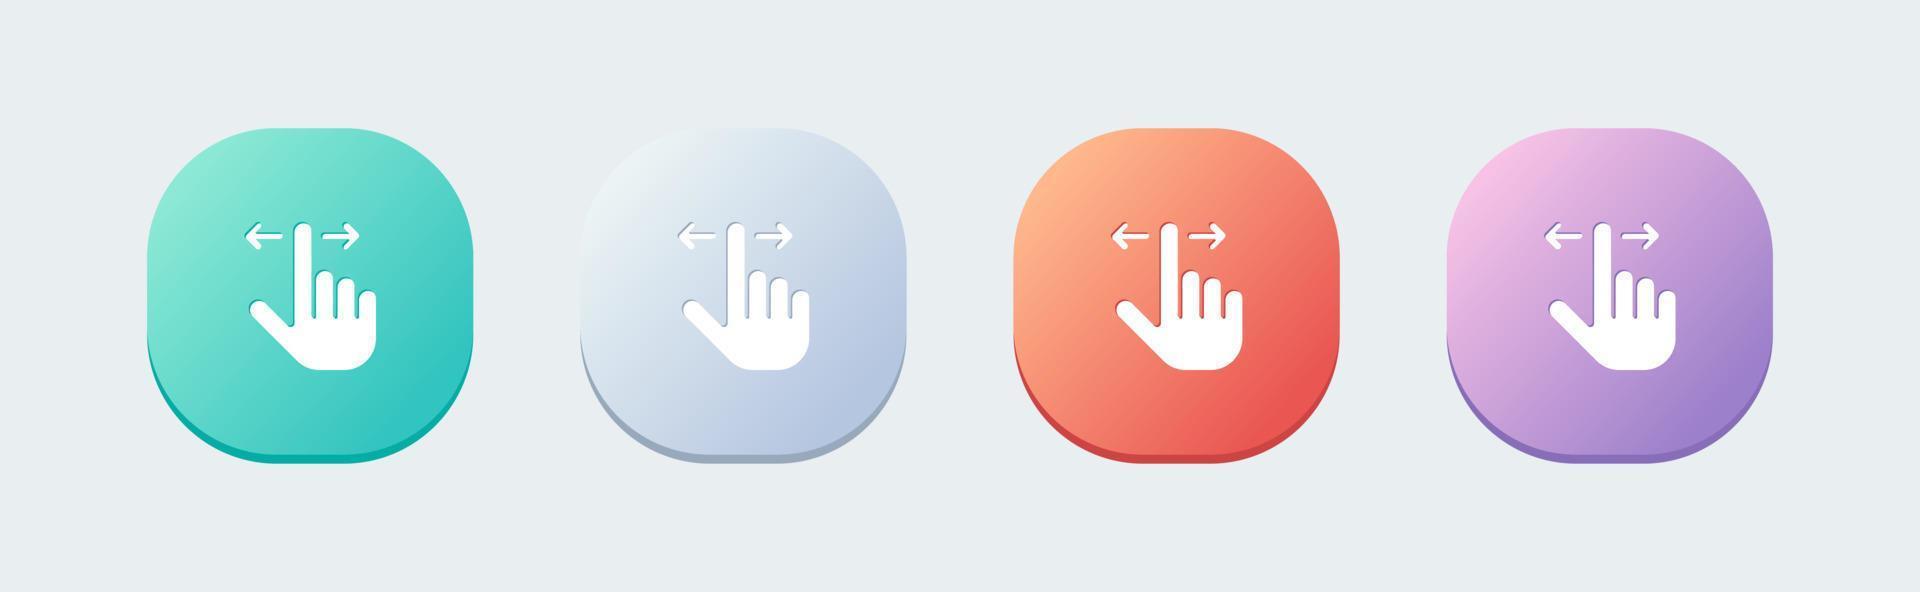 Gesture solid icon in flat design style. Touch signs vector illustration.